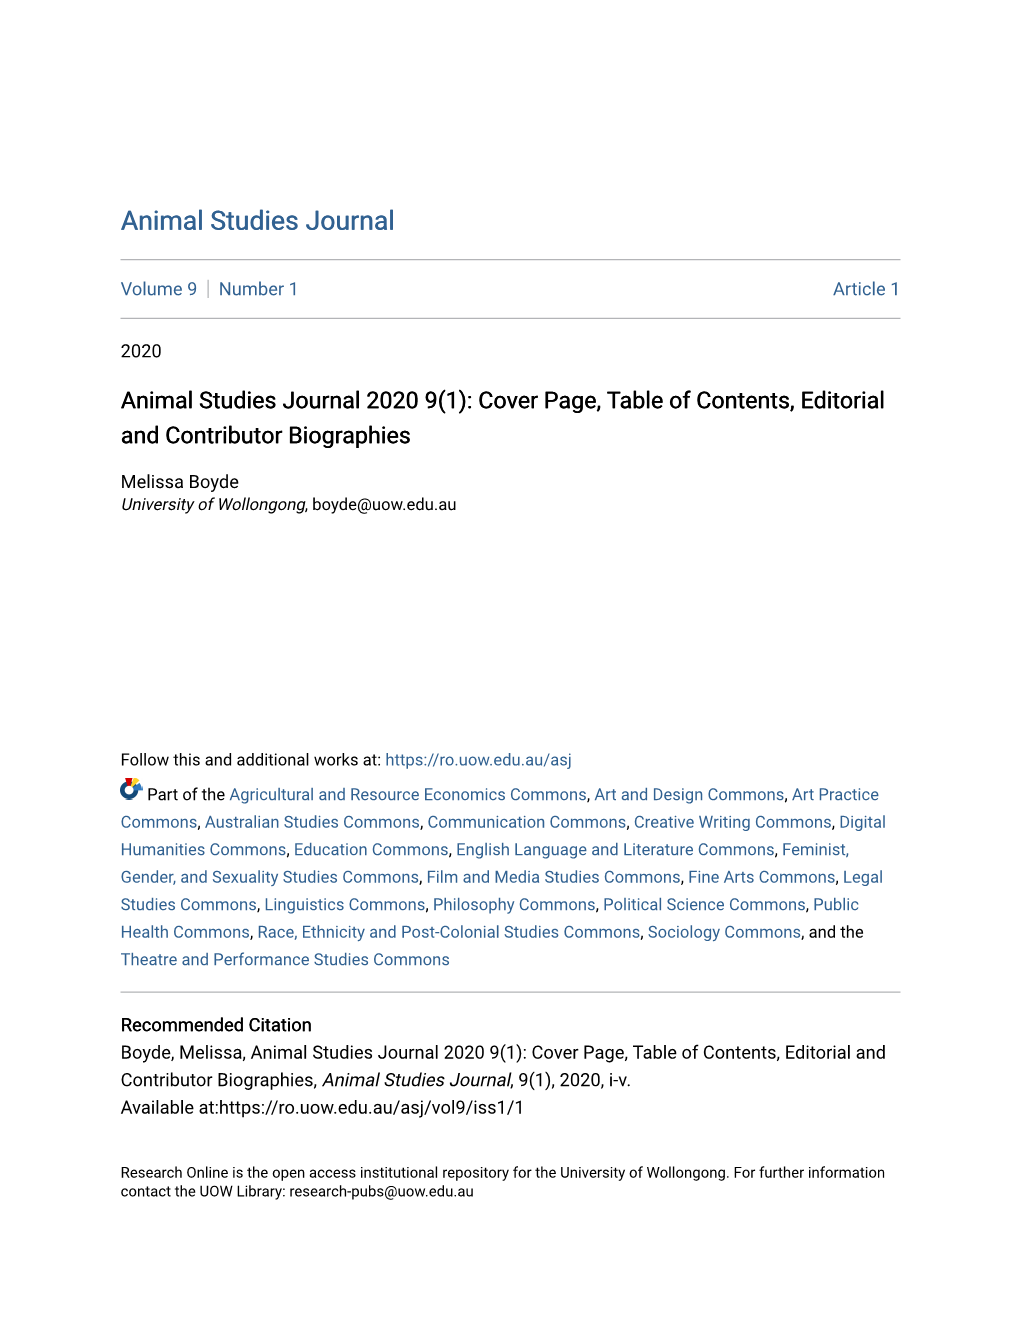 Animal Studies Journal 2020 9(1): Cover Page, Table of Contents, Editorial and Contributor Biographies